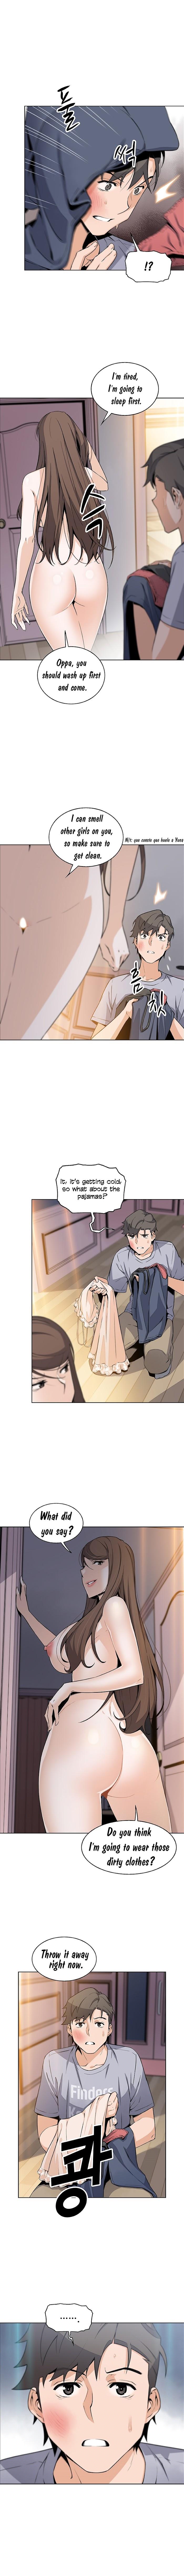 Housekeeper [Neck Pillow, Paper] Ch.49/49 [English] [Manhwa PDF] Completed 373